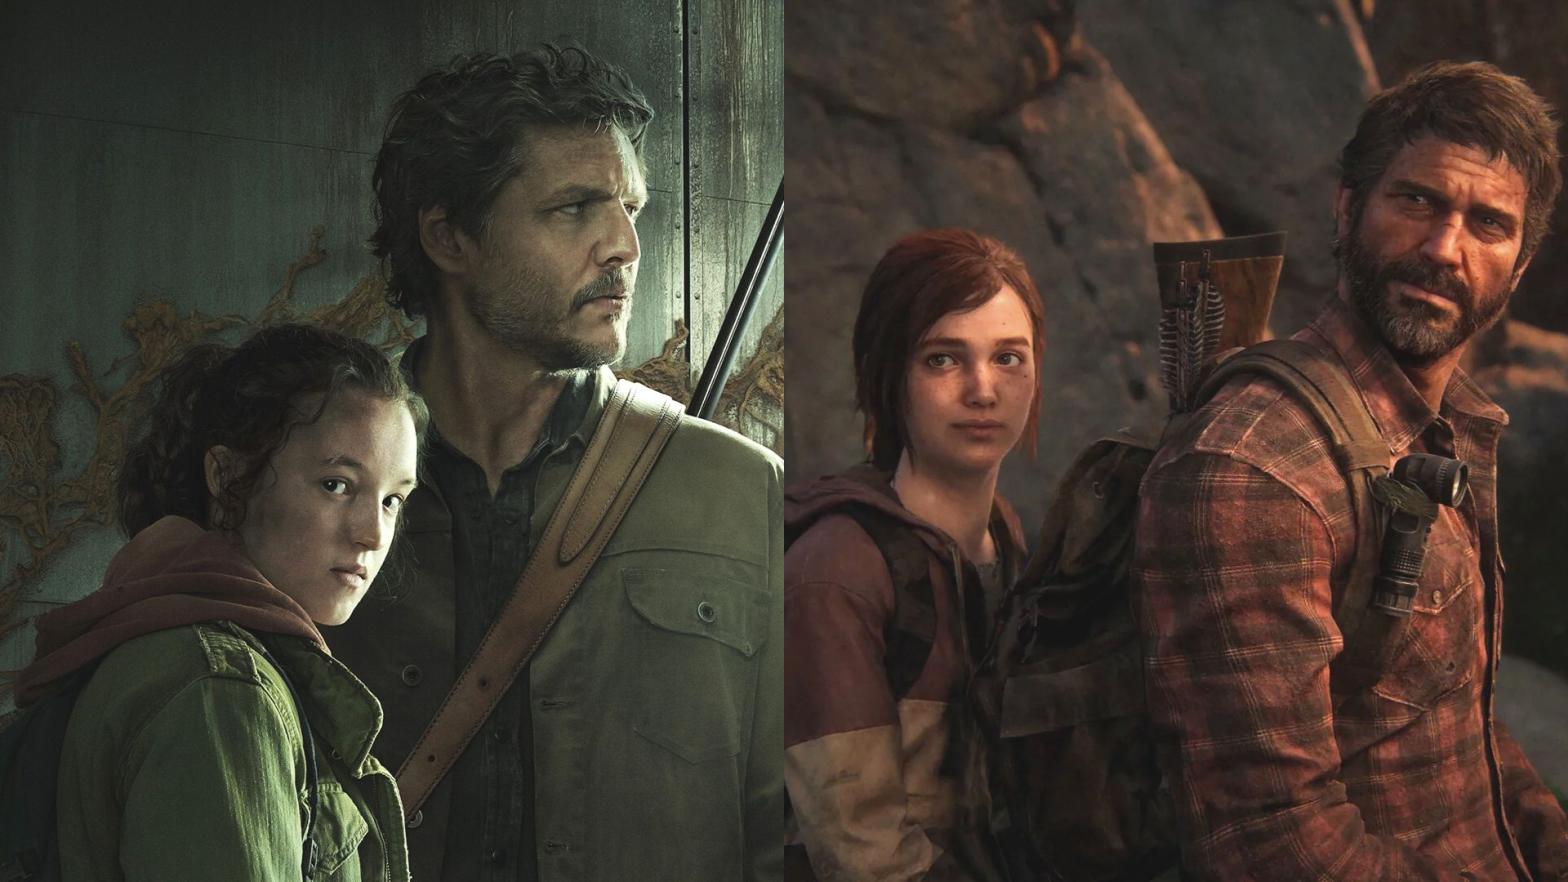 The Last of Us video game finally has a TV adaptation